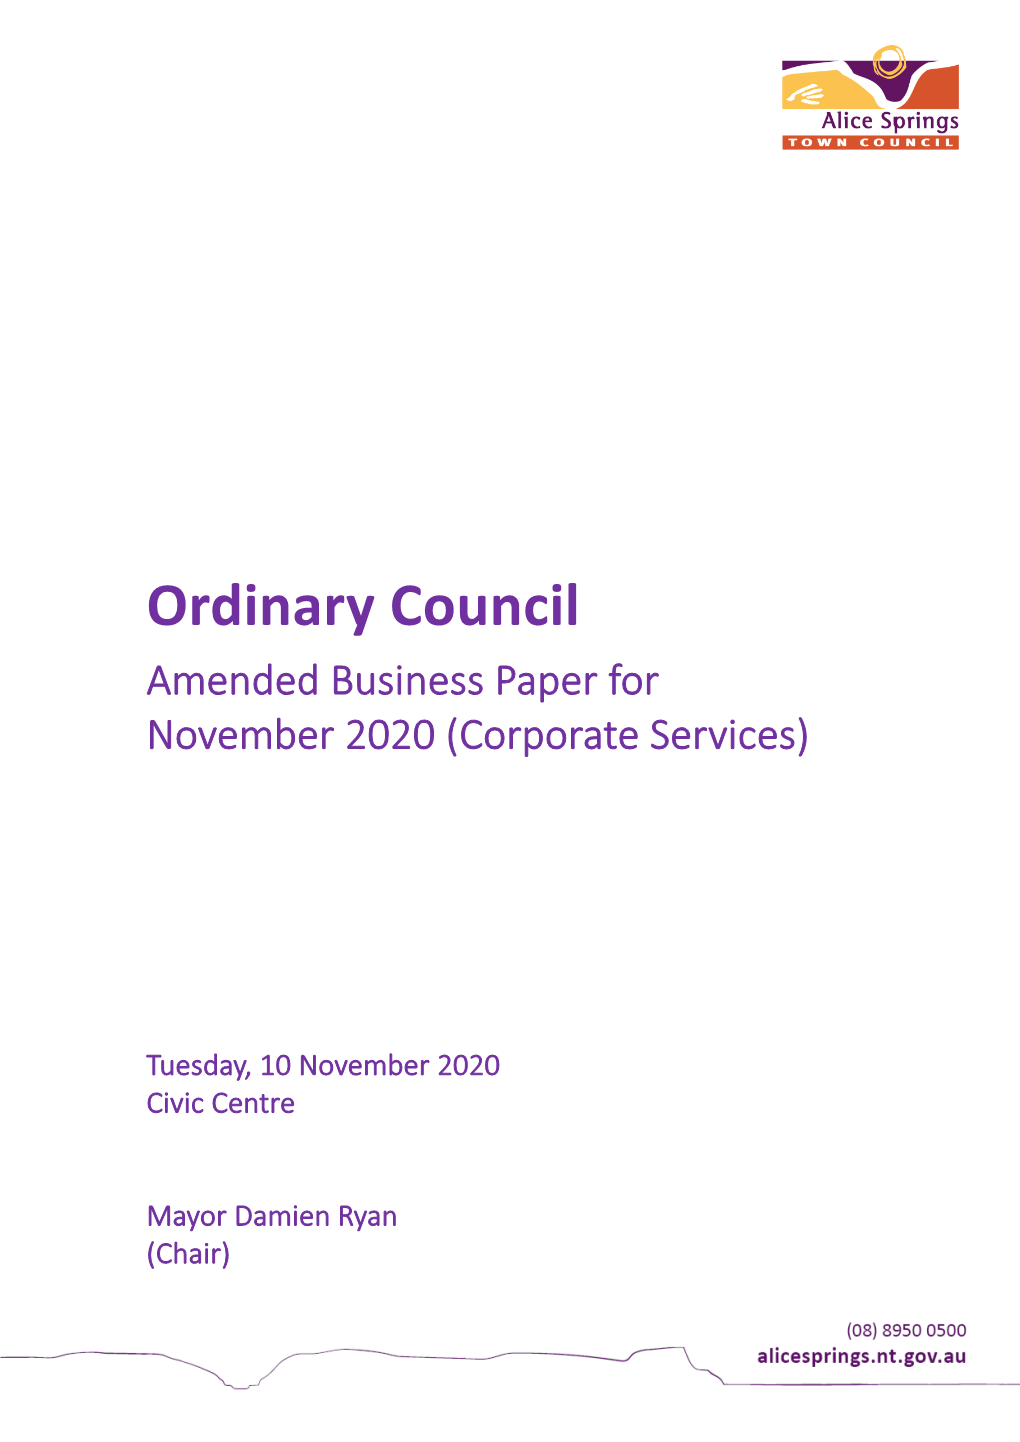 Ordinary Council Amended Business Paper for November 2020 (Corporate Services)